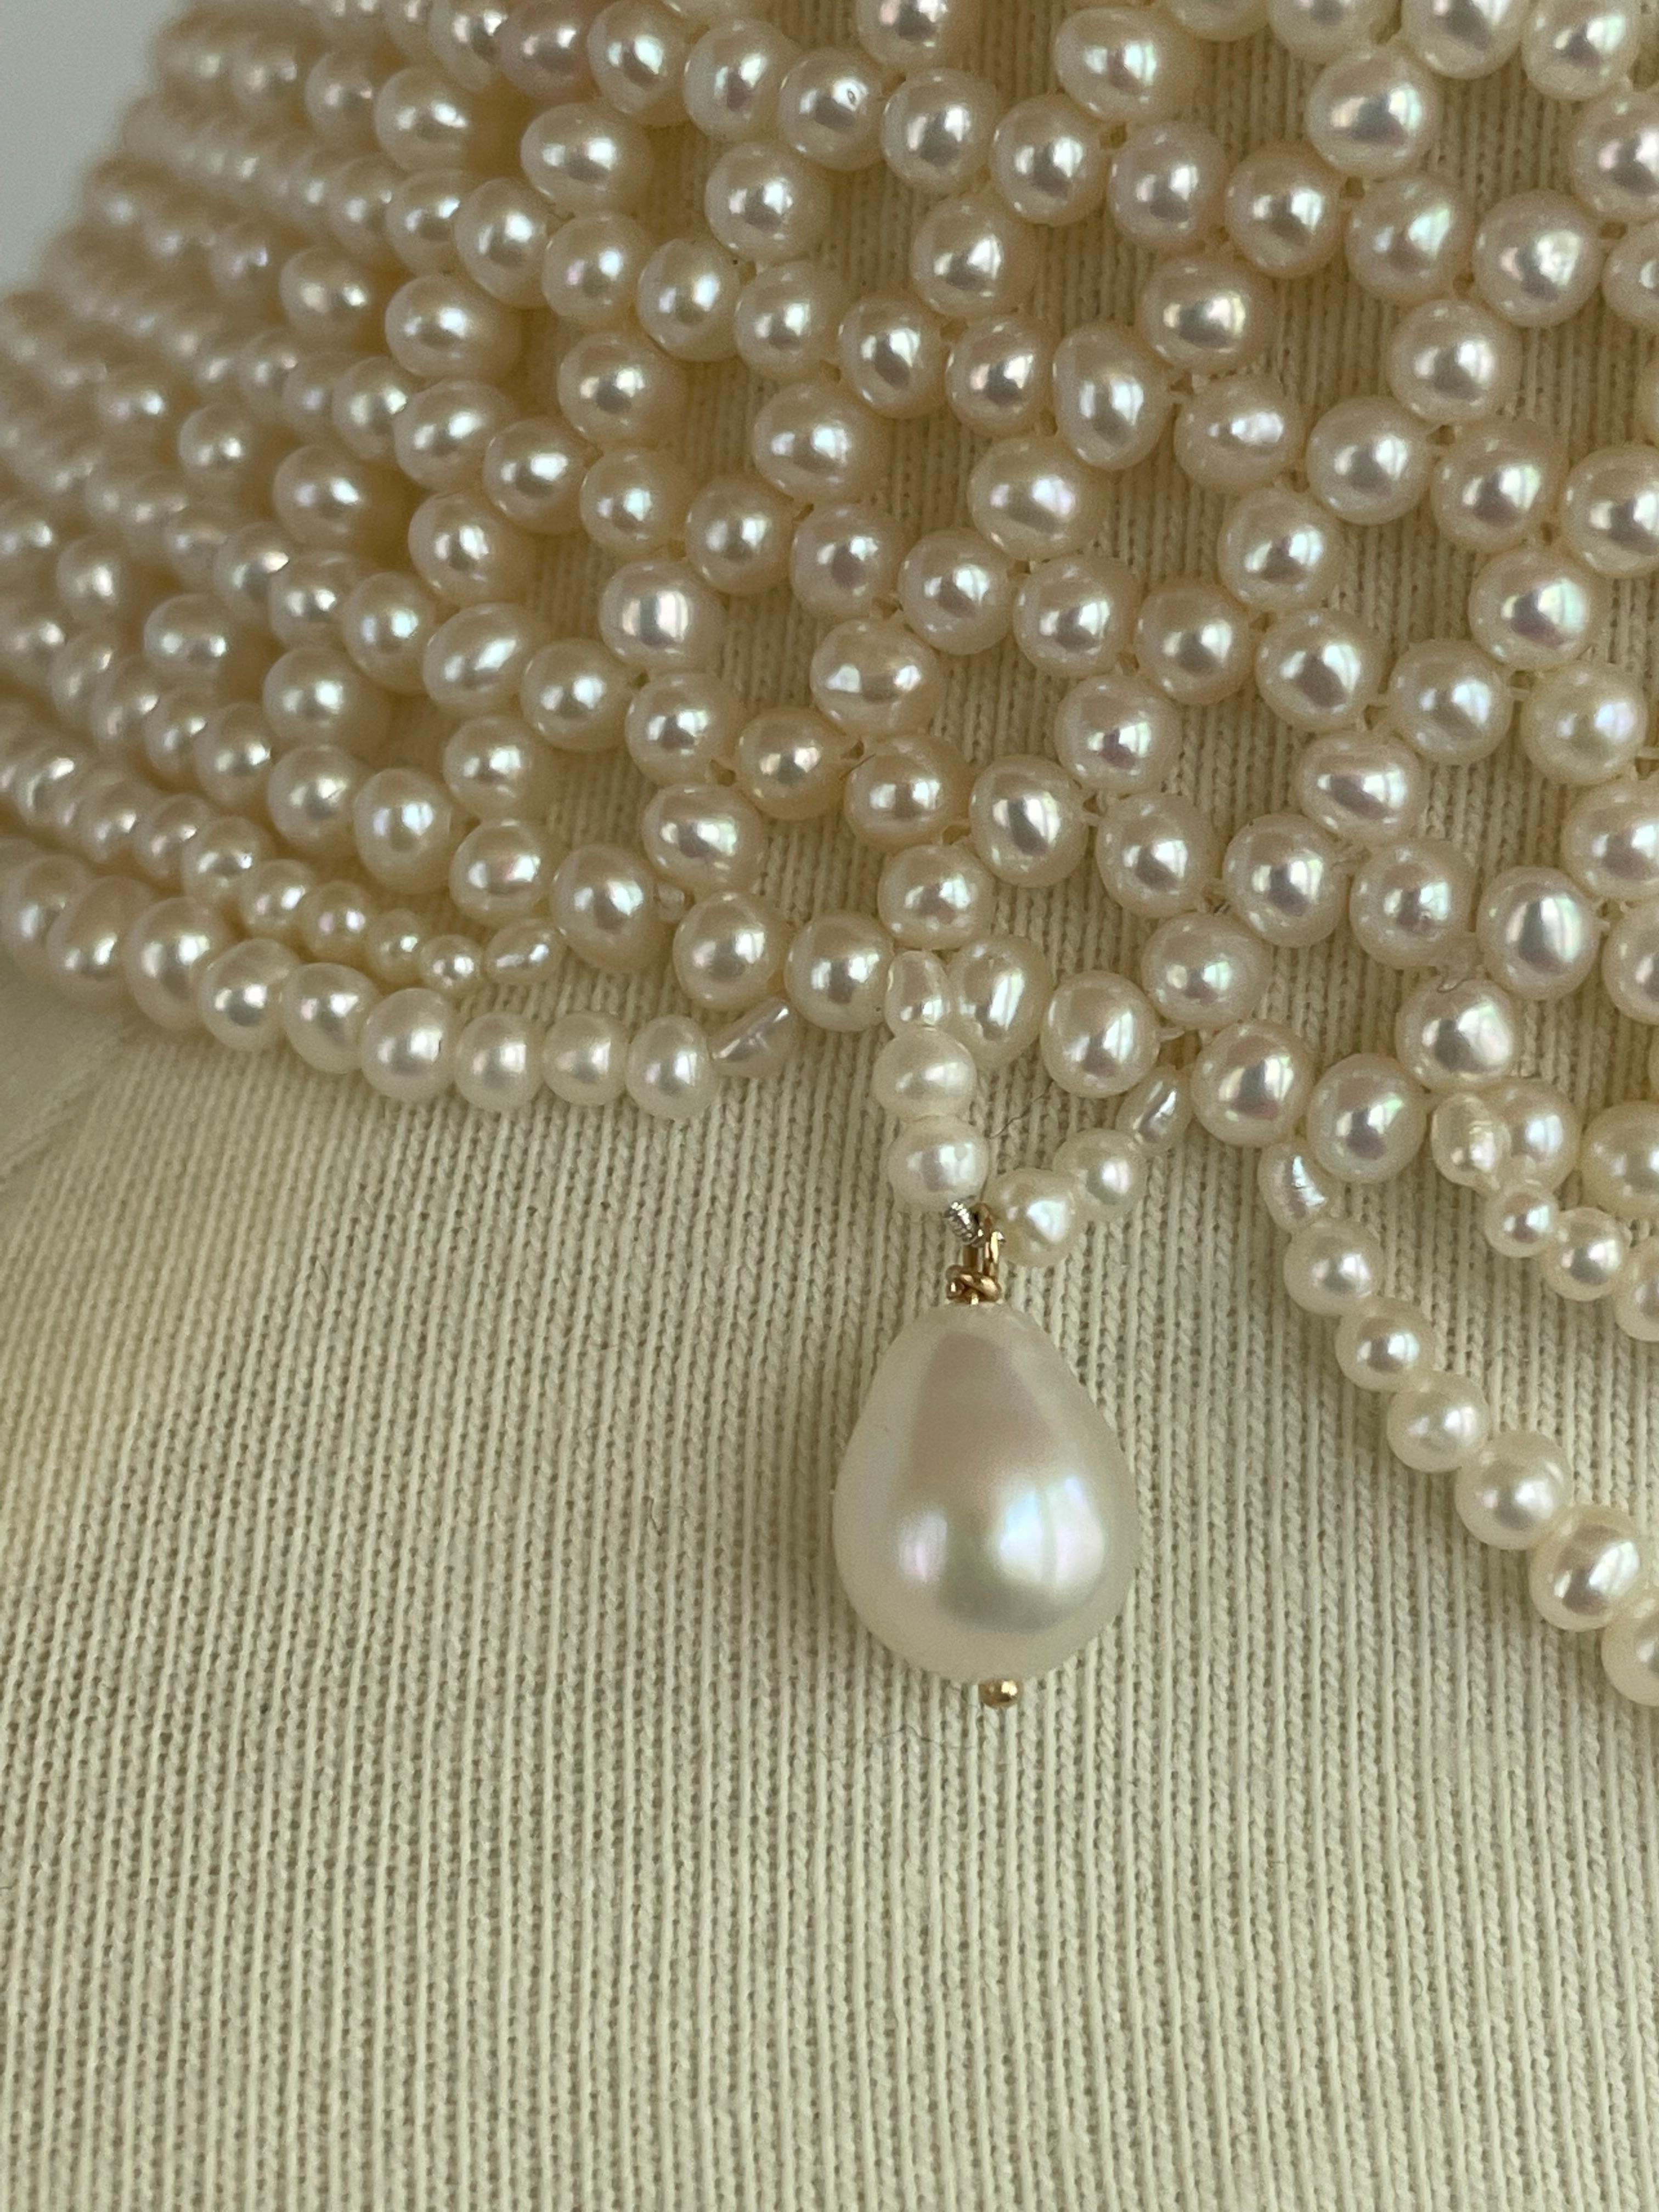 Bead Marina J. Woven Pearl Draped Choker with Pearl Drops and Secure Sliding Clasp For Sale